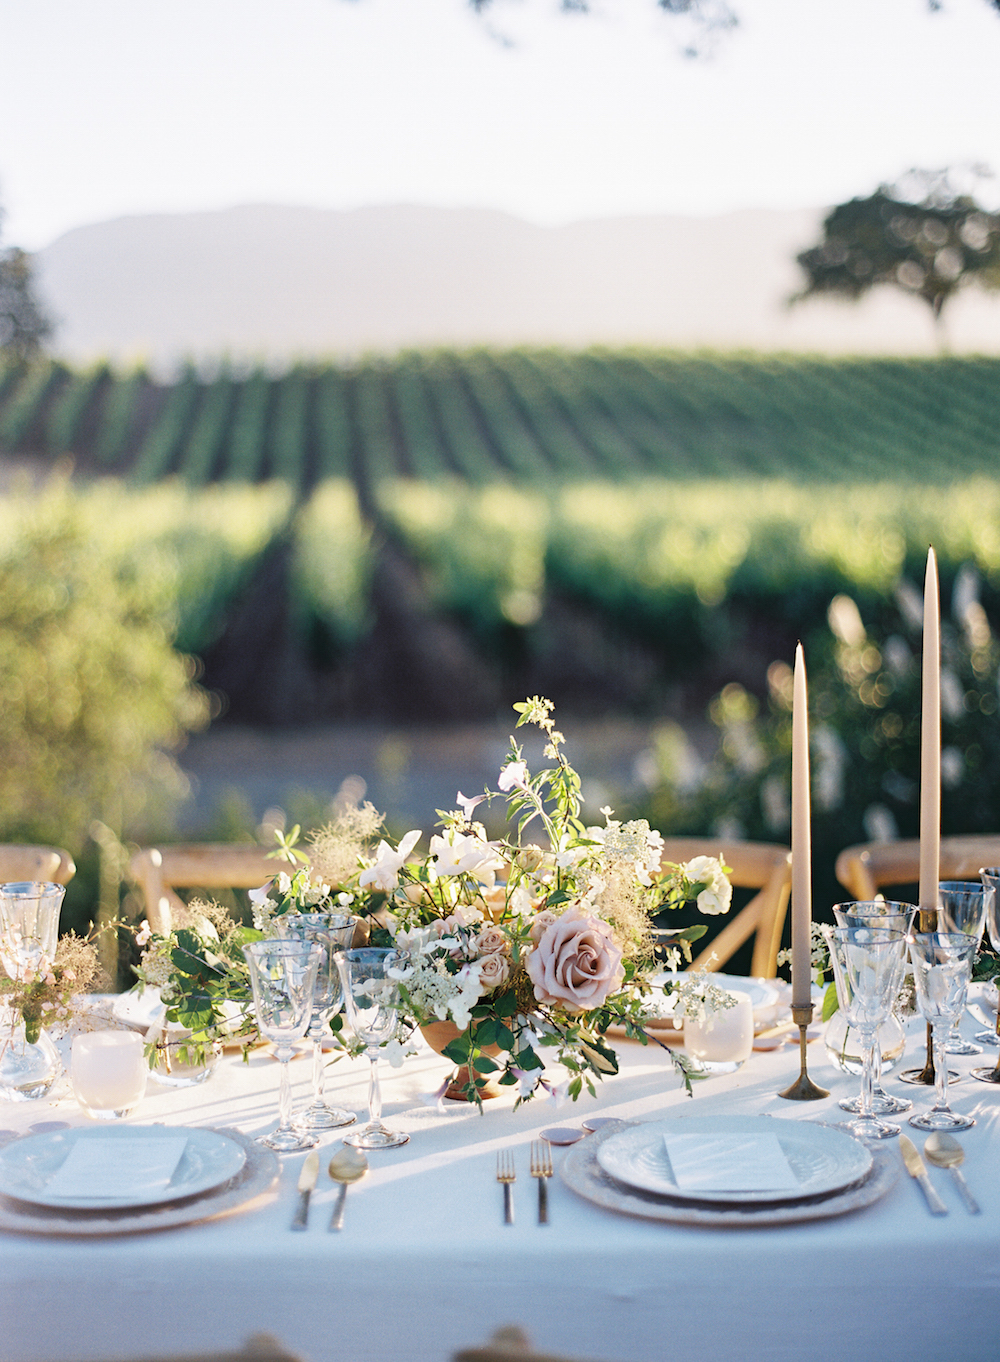  Golden Napa Valley light crawling across a magical al fresco tablescape set in a vineyard.  Photo by Eric Kelley. Event Design by Jenny Schneider Events and Laurie Arons Special Events. 